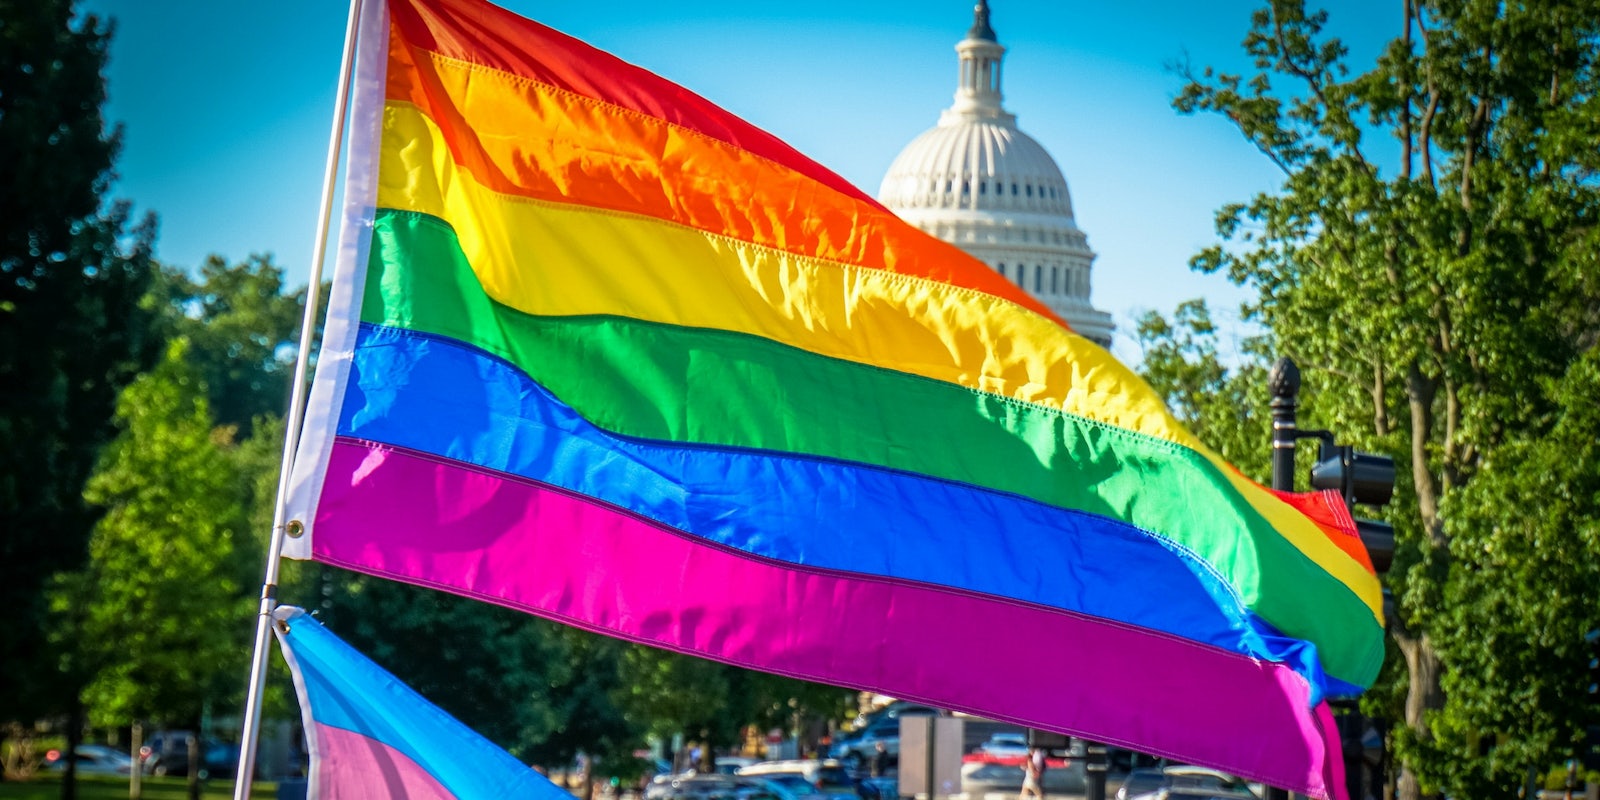 The LGBTQ flag flyig in front of the U.S. capitol building.